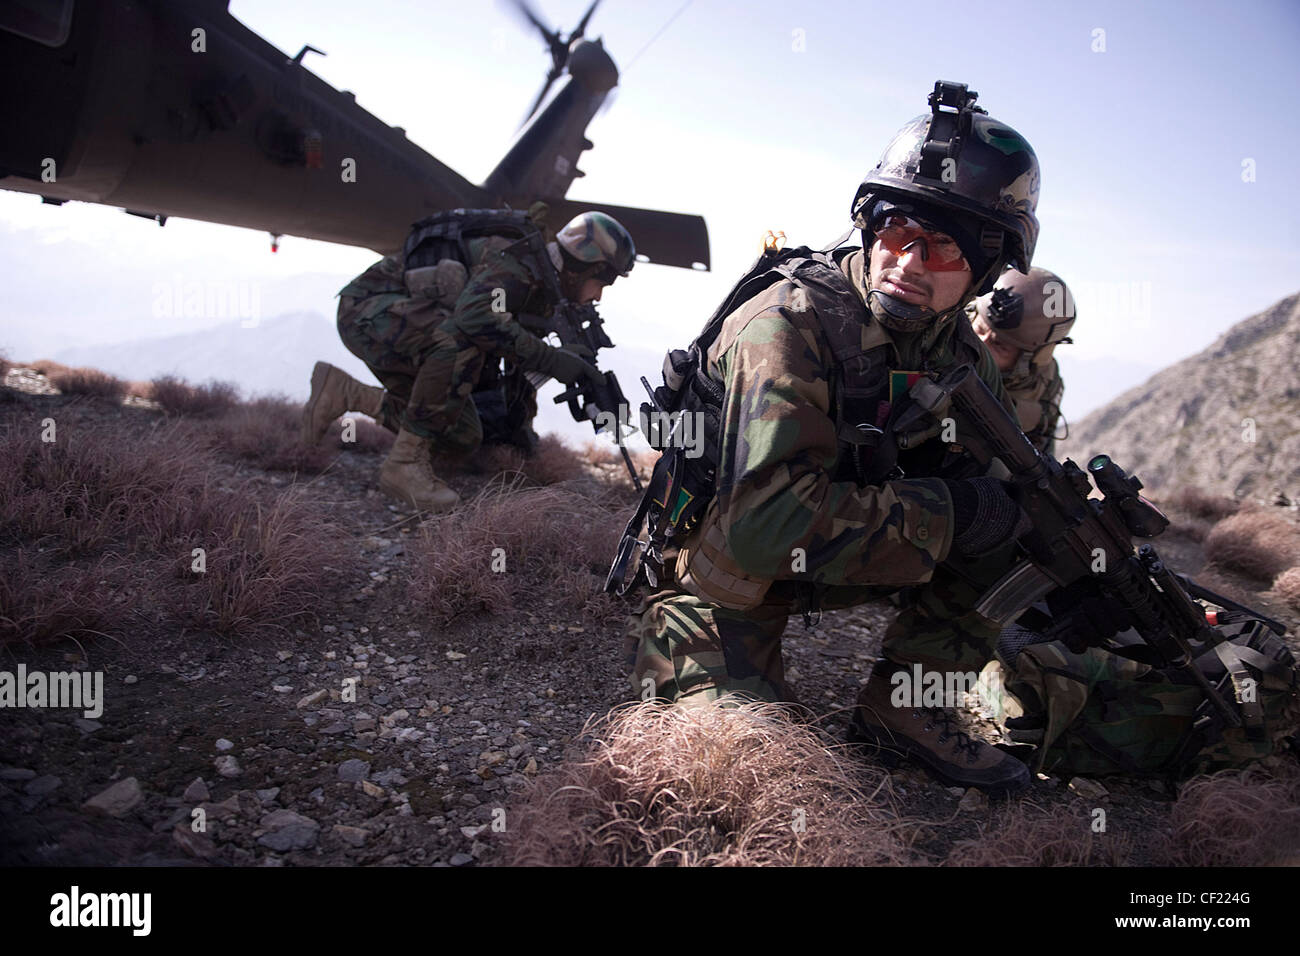 An Afghan National Army Commando dismounts a UH-60 Blackhawk helicopter during a mission in Kunar province, Afghanistan, Feb. 25. The commando-led mission conducted reconnaissance for a future Village Stability Platform, a site Afghan forces and coalition Special Operations Forces will use to live and work with villagers. Stock Photo